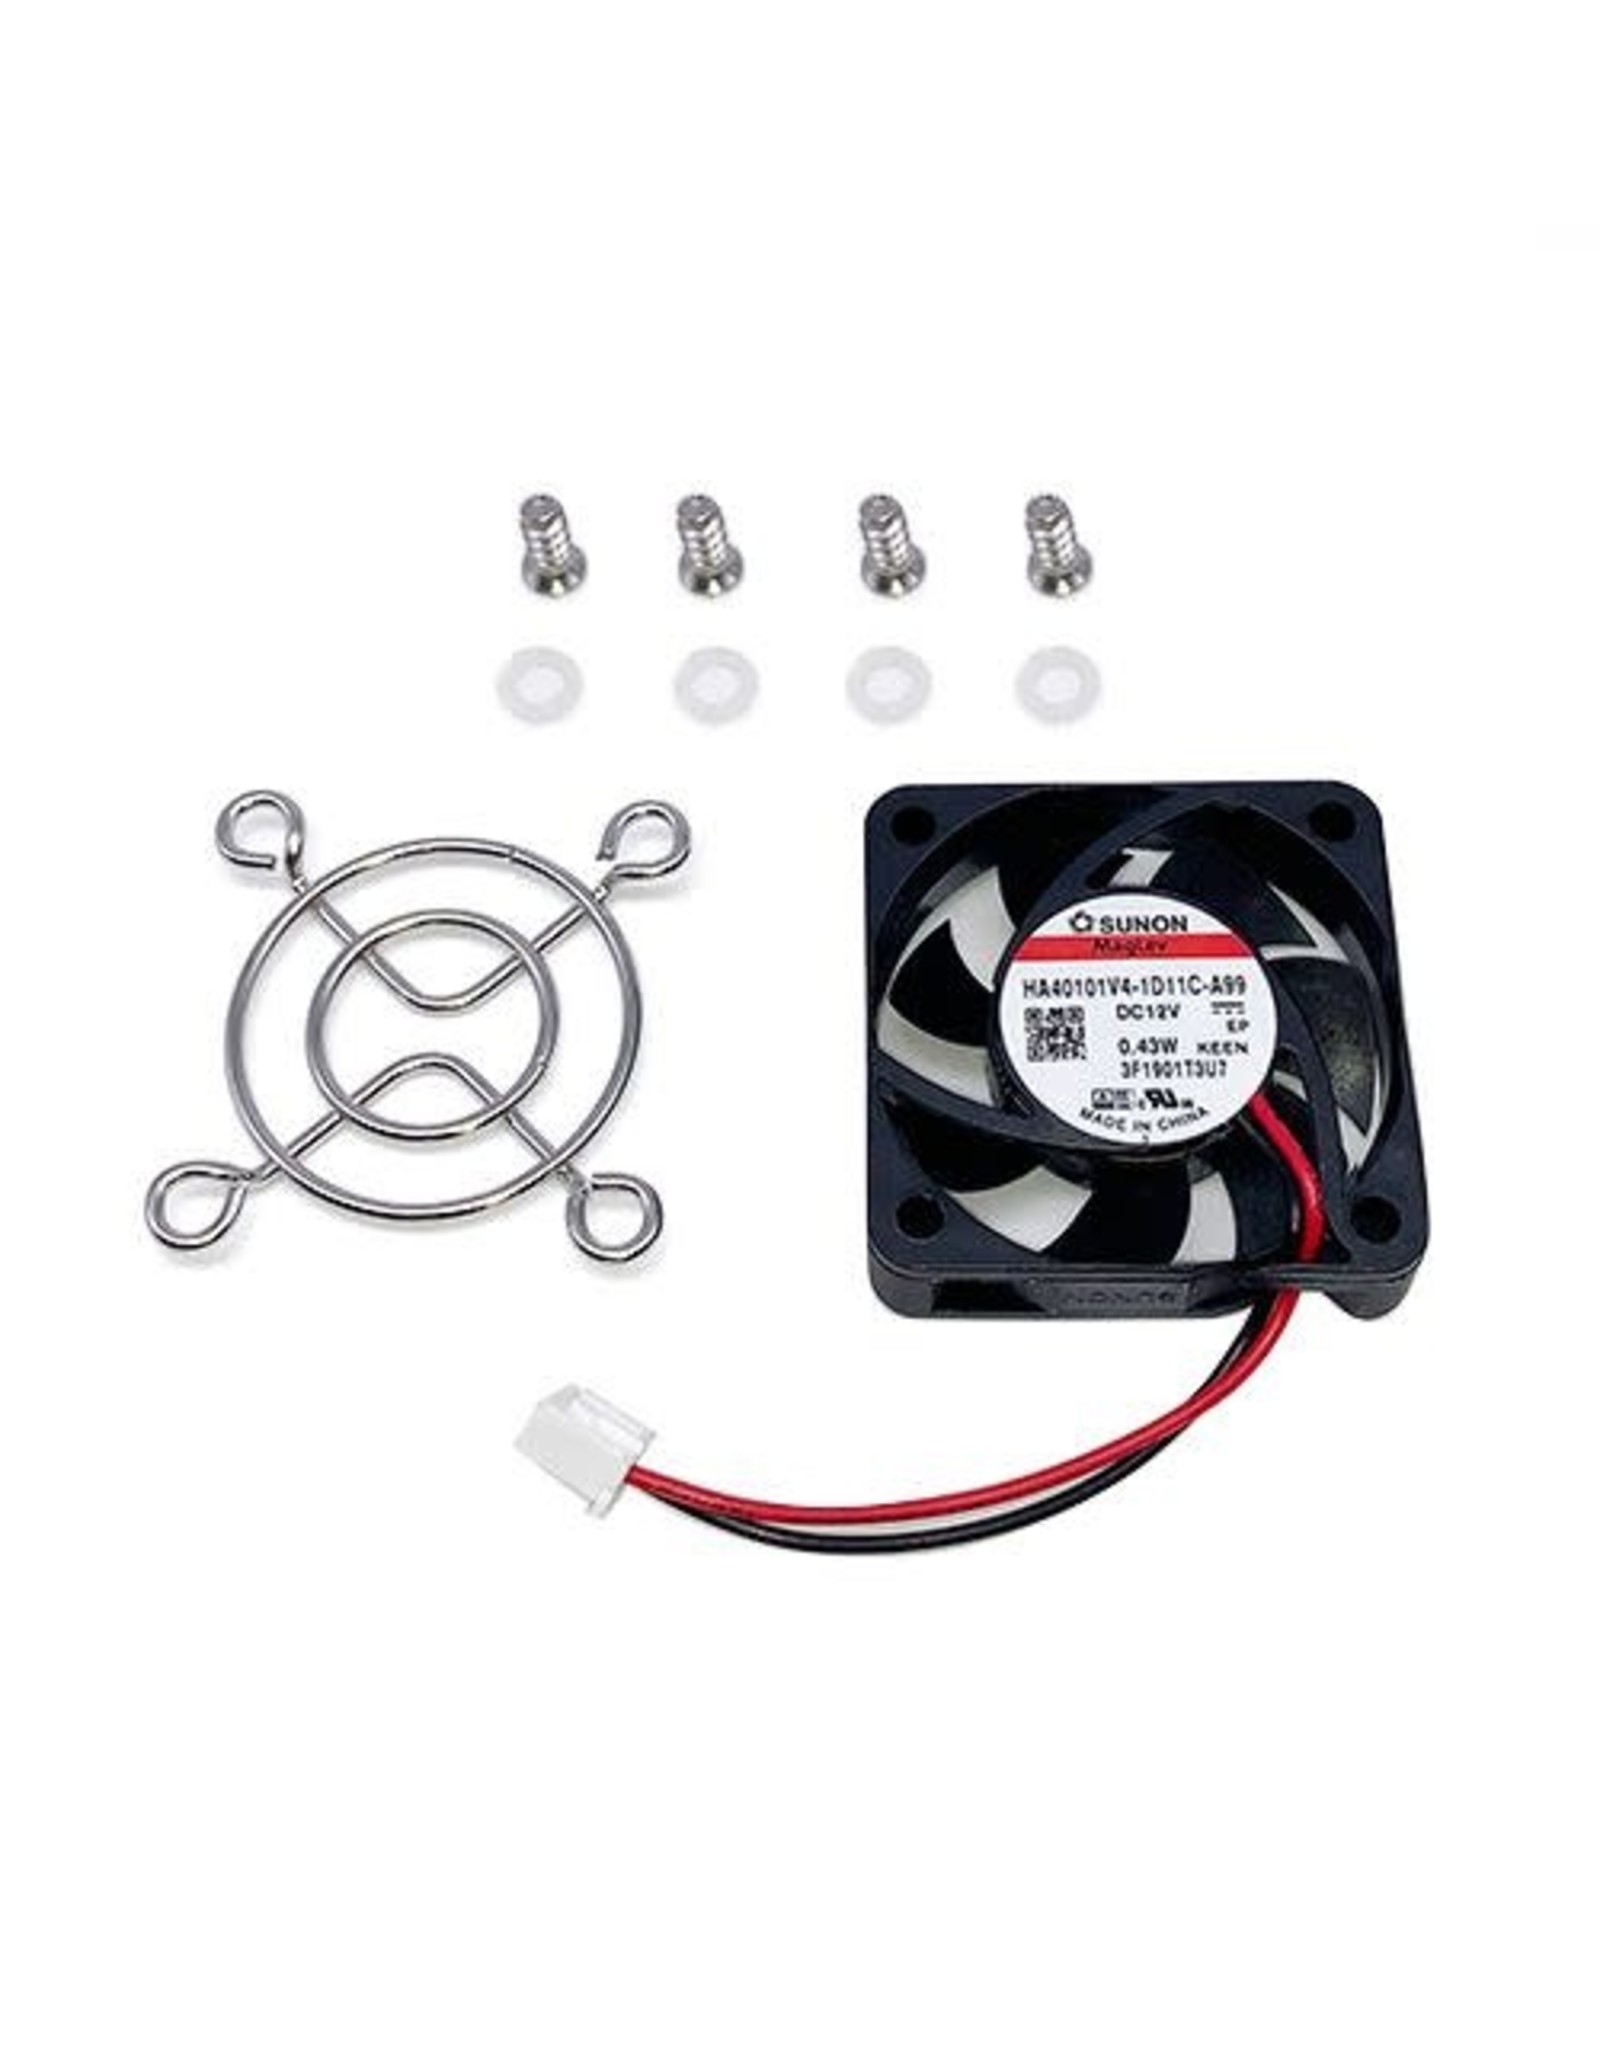 ZWO ZWO Fan for Cooled/Pro Cameras